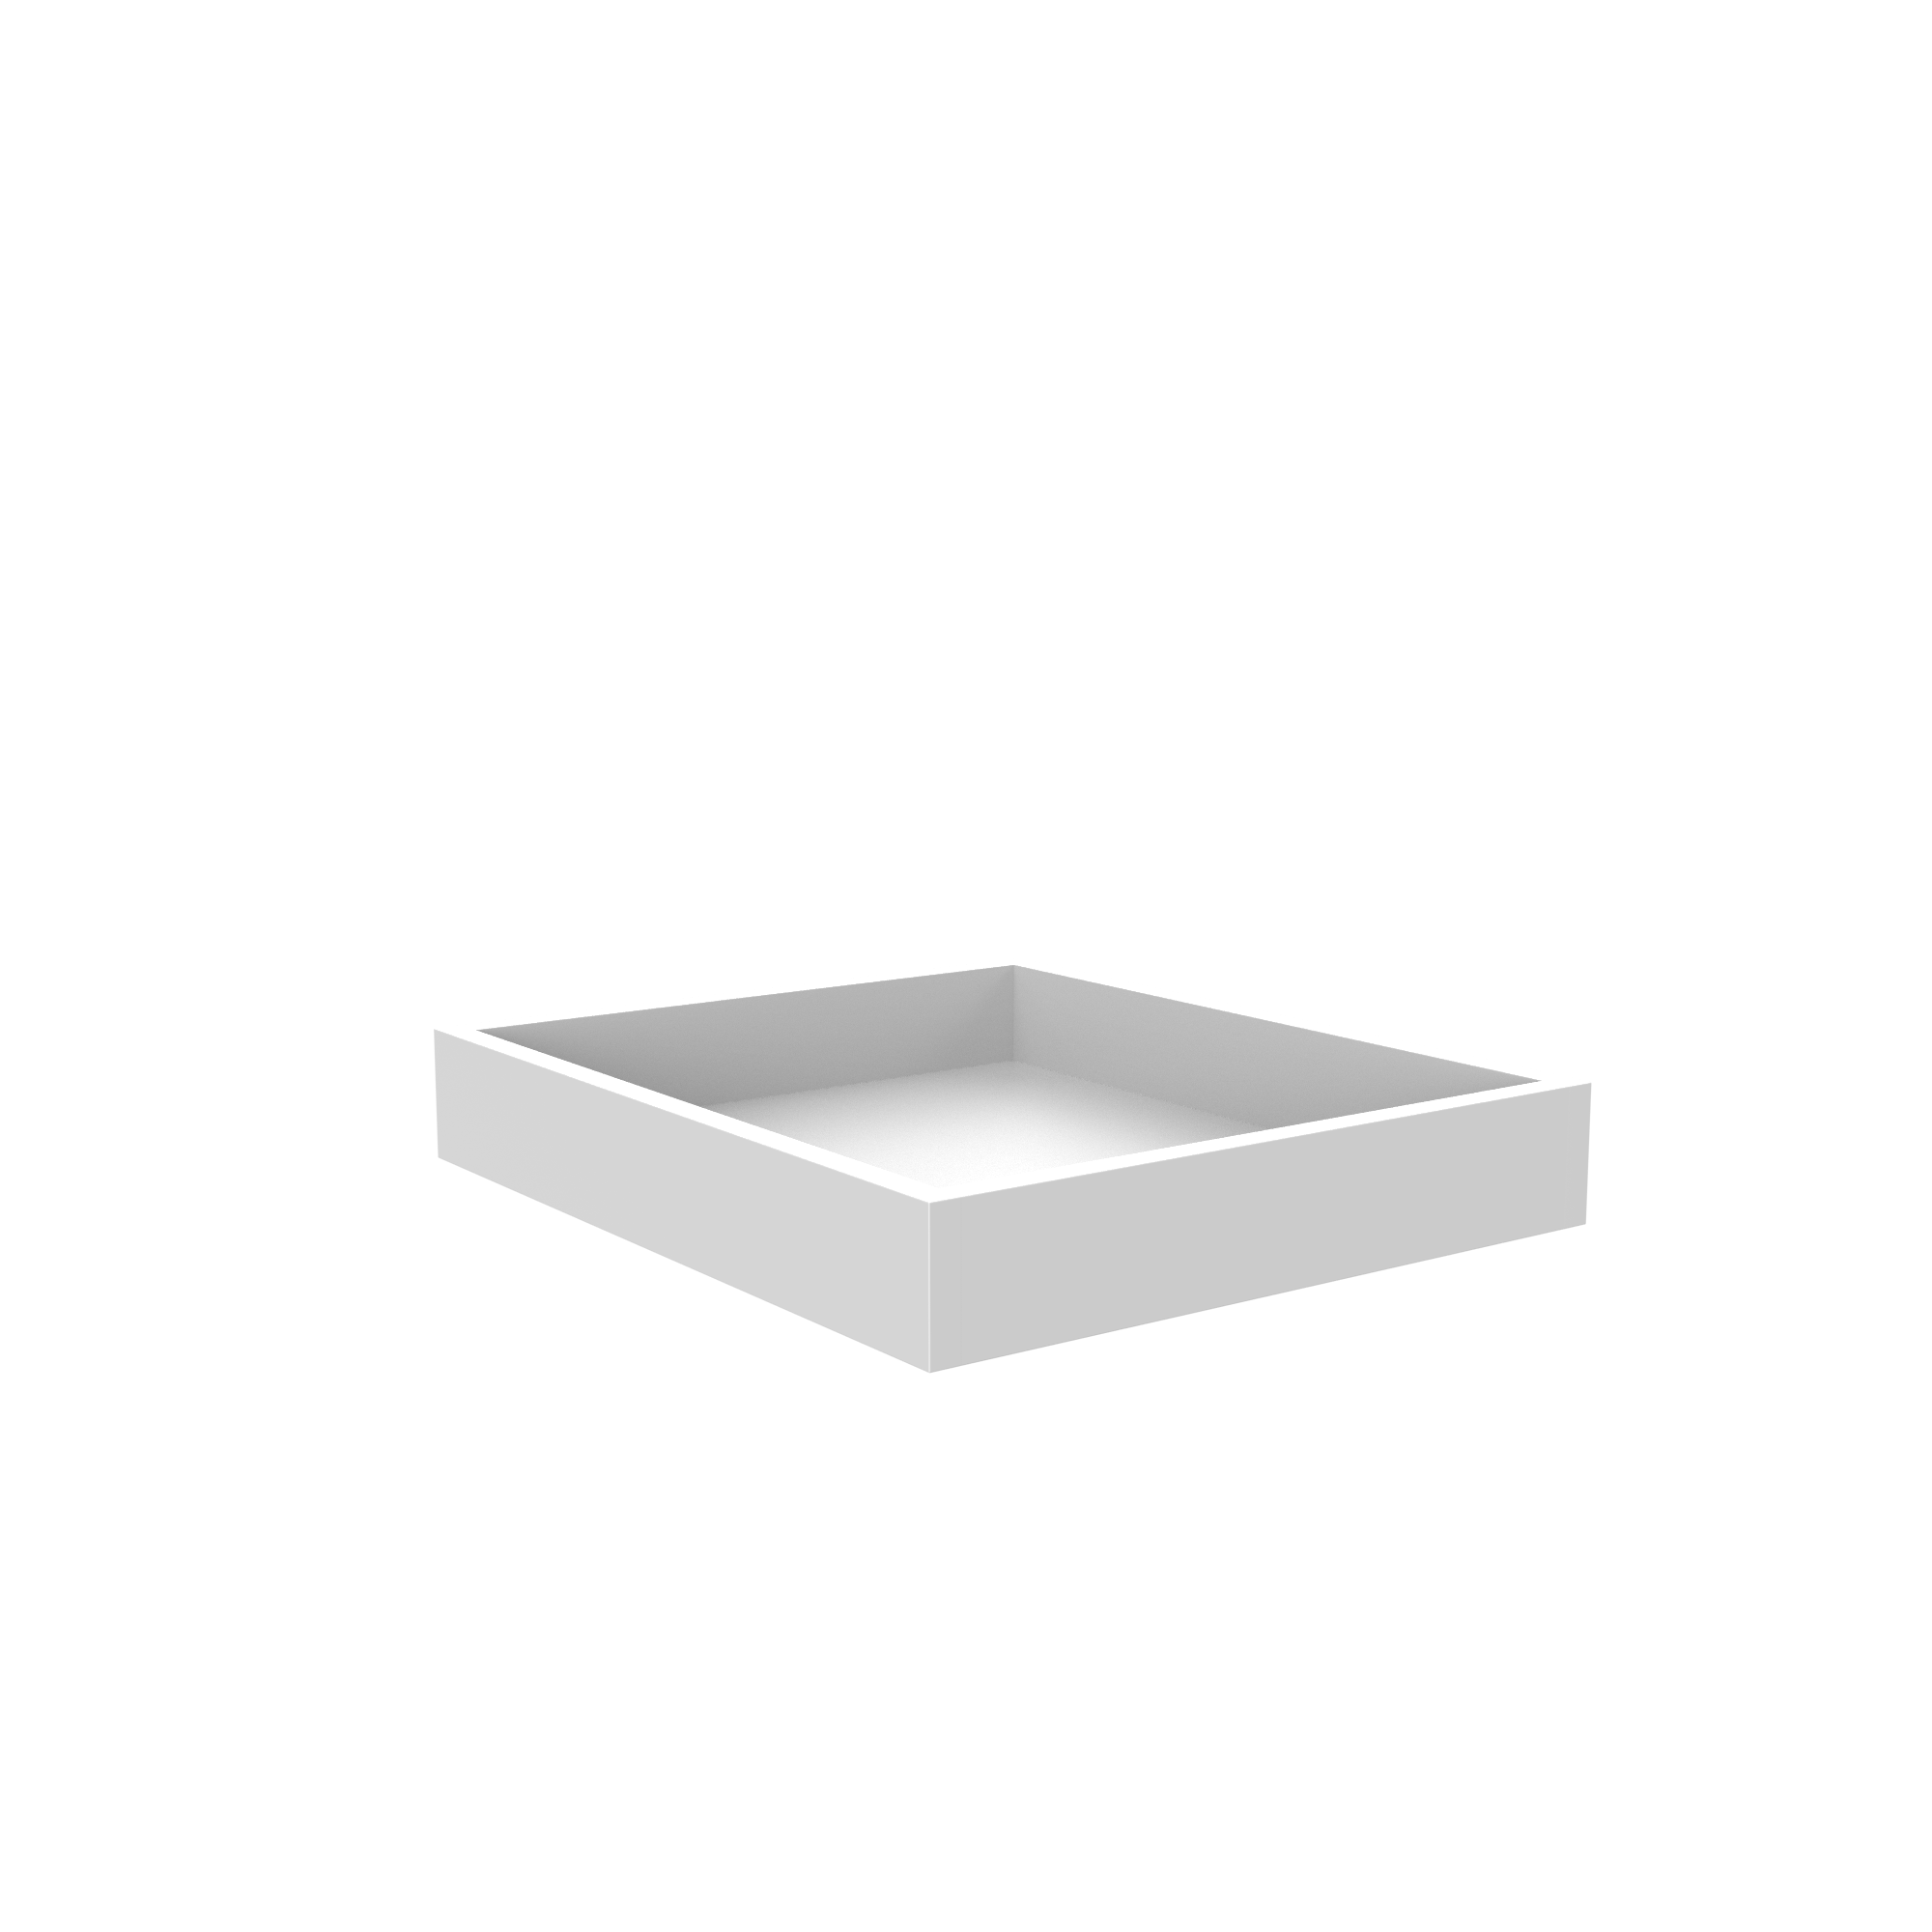 Roll Out Tray for Cabinets - Fits B18 - Aria White Shaker Cabinet